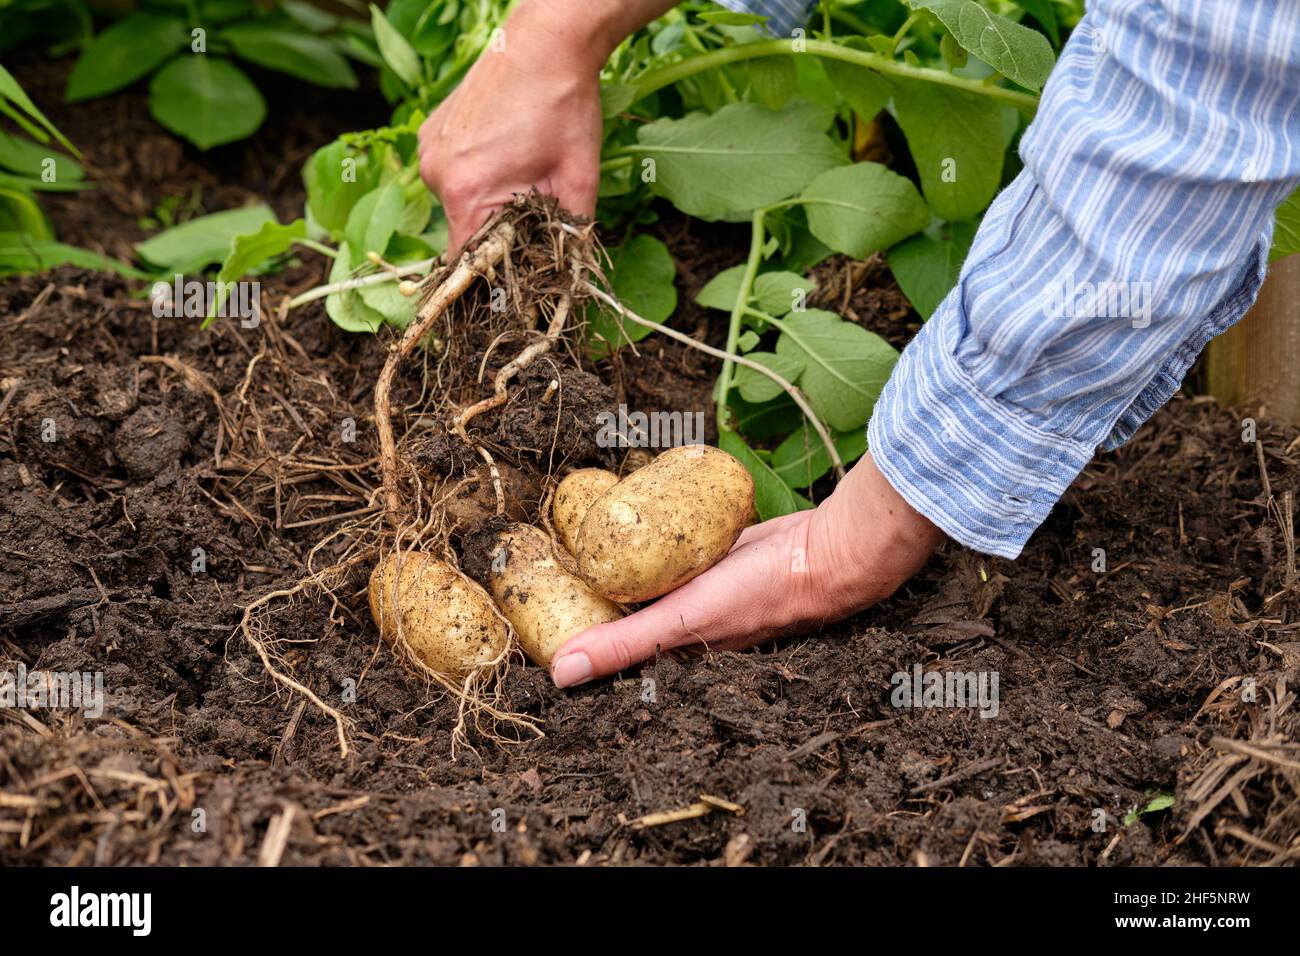 A female gardener lifting Charlotte New Potatoes from a rich organic matter filled soil in a vegetable garden raised bed. Stock Photo